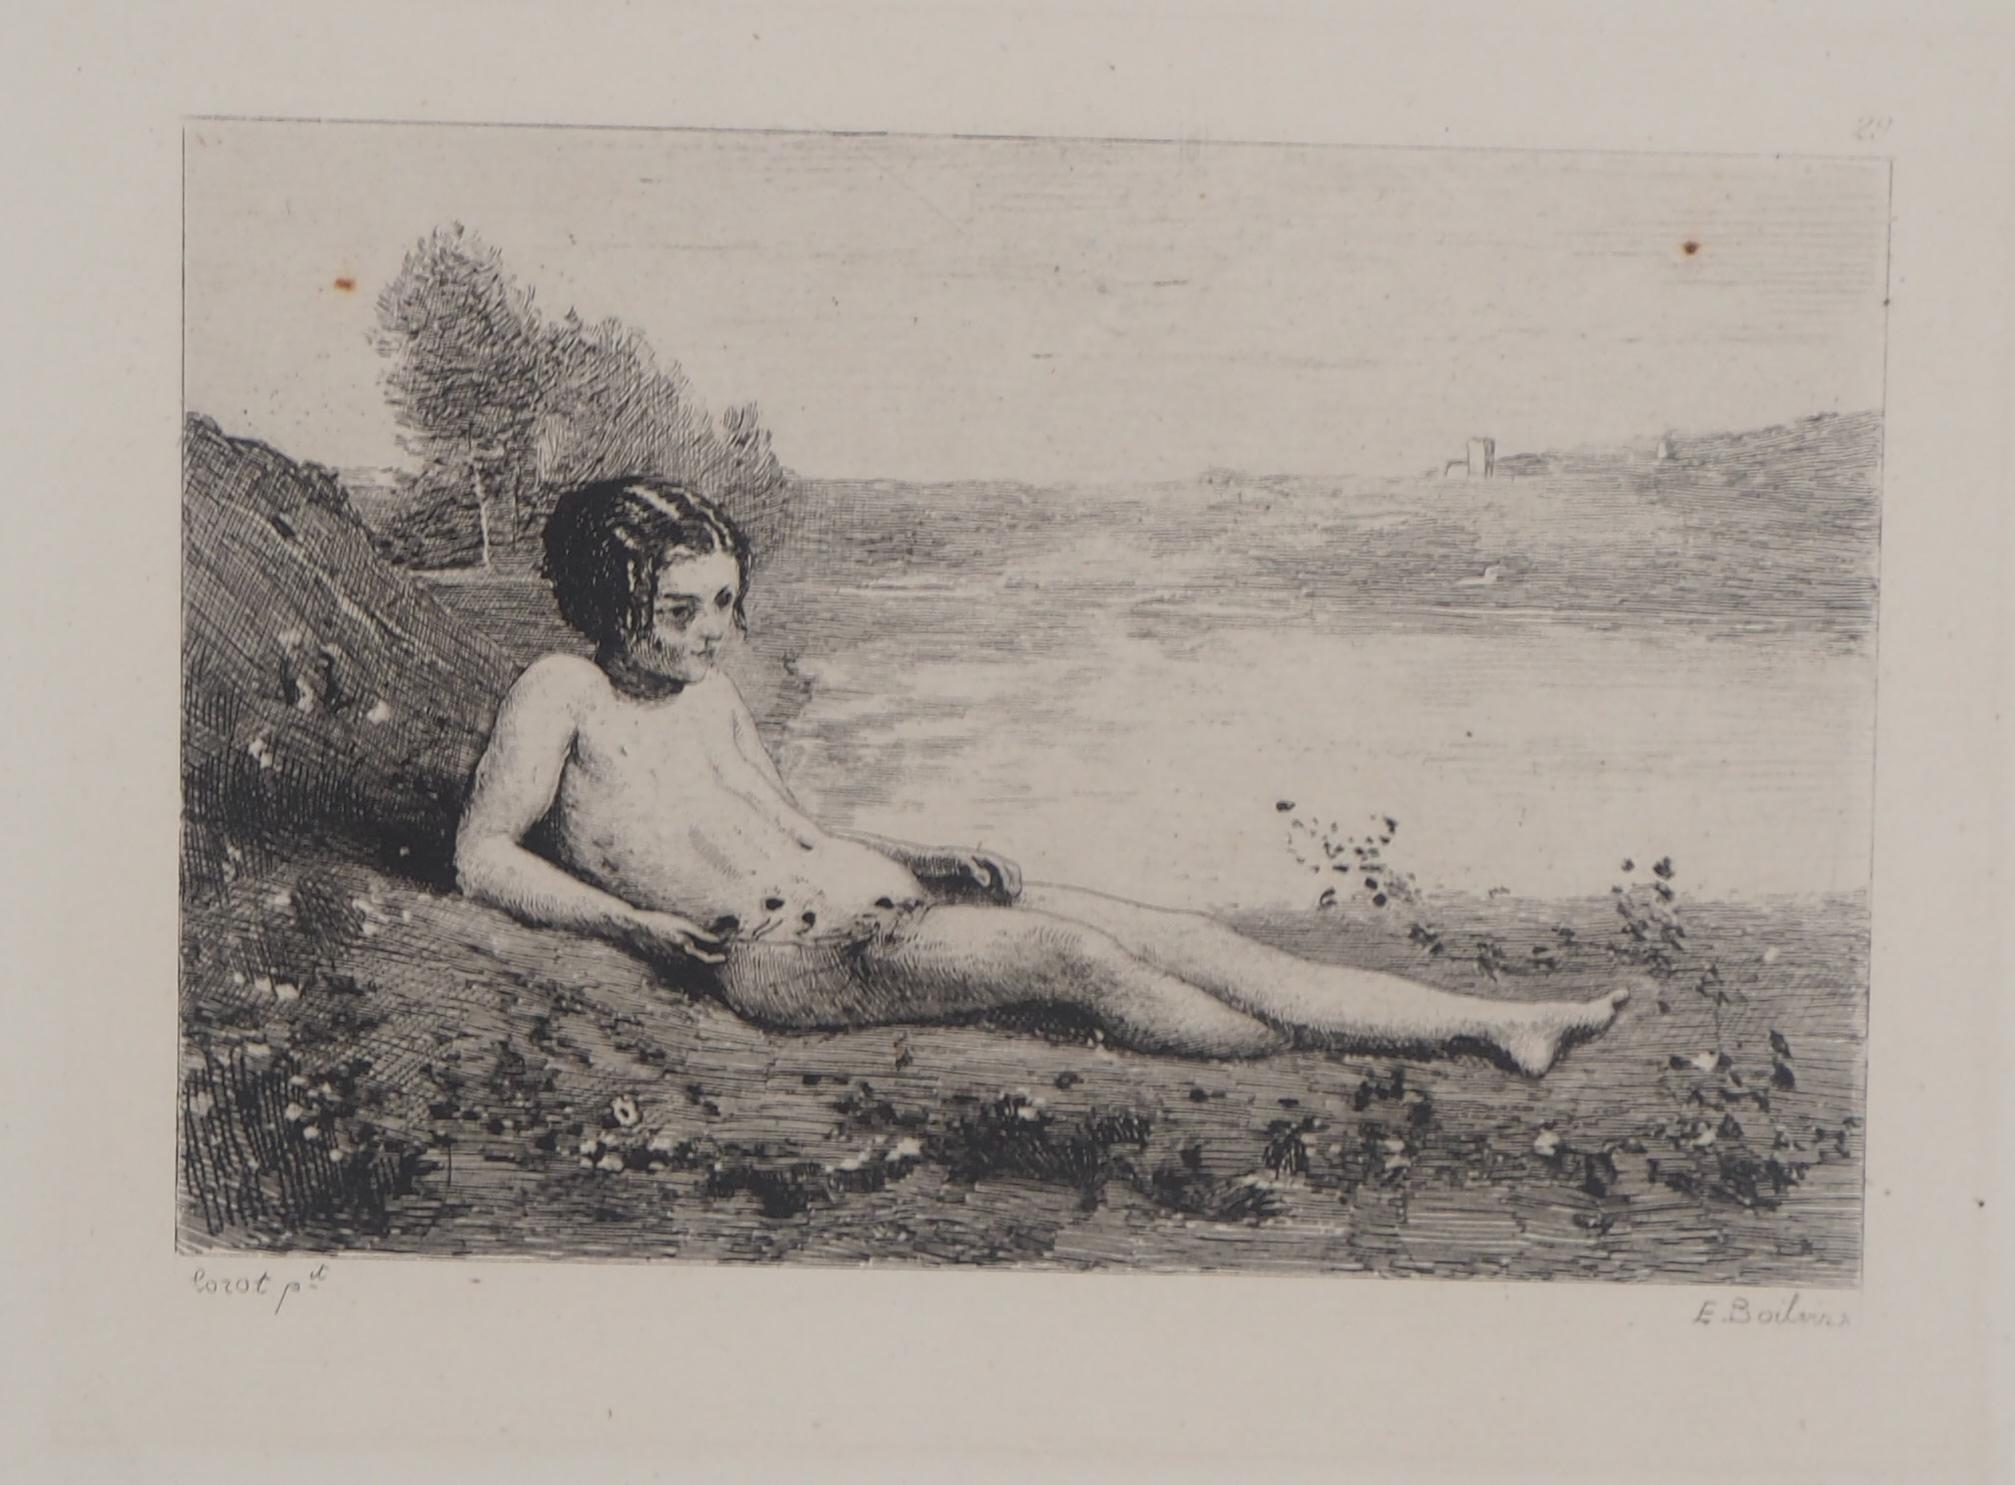 Jean-Baptiste-Camille Corot Landscape Print - After the Bath - Original etching - Ed. Durand Ruel, 1873